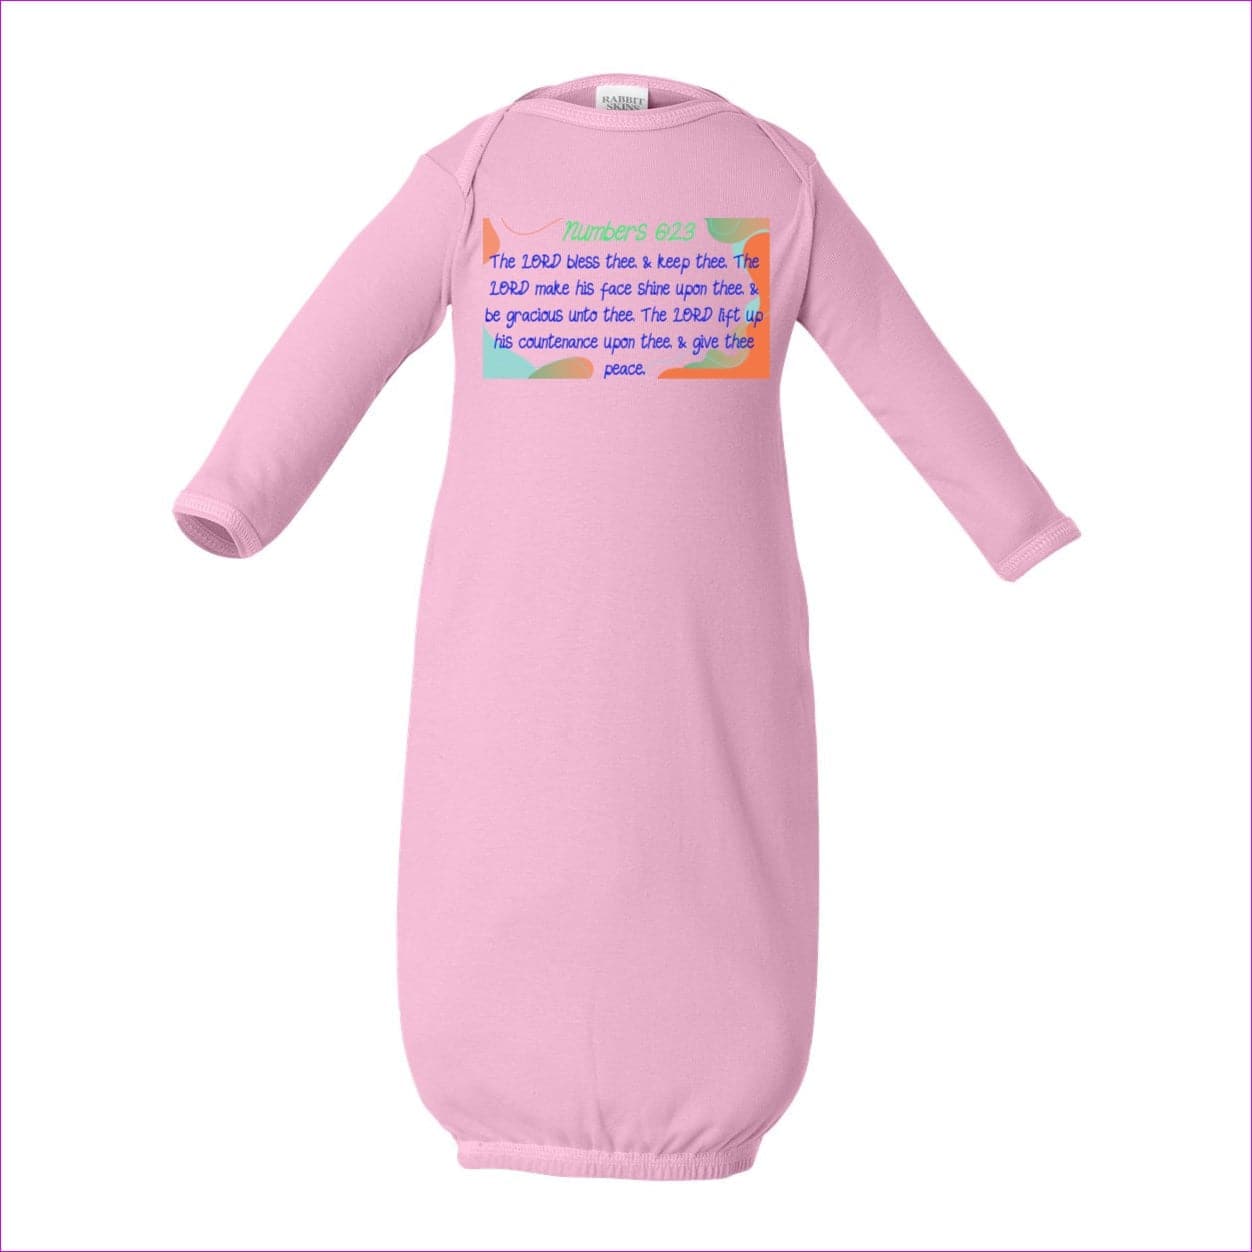 NB Pink - Numbers 6:23 Newborn Layette - layette at TFC&H Co.